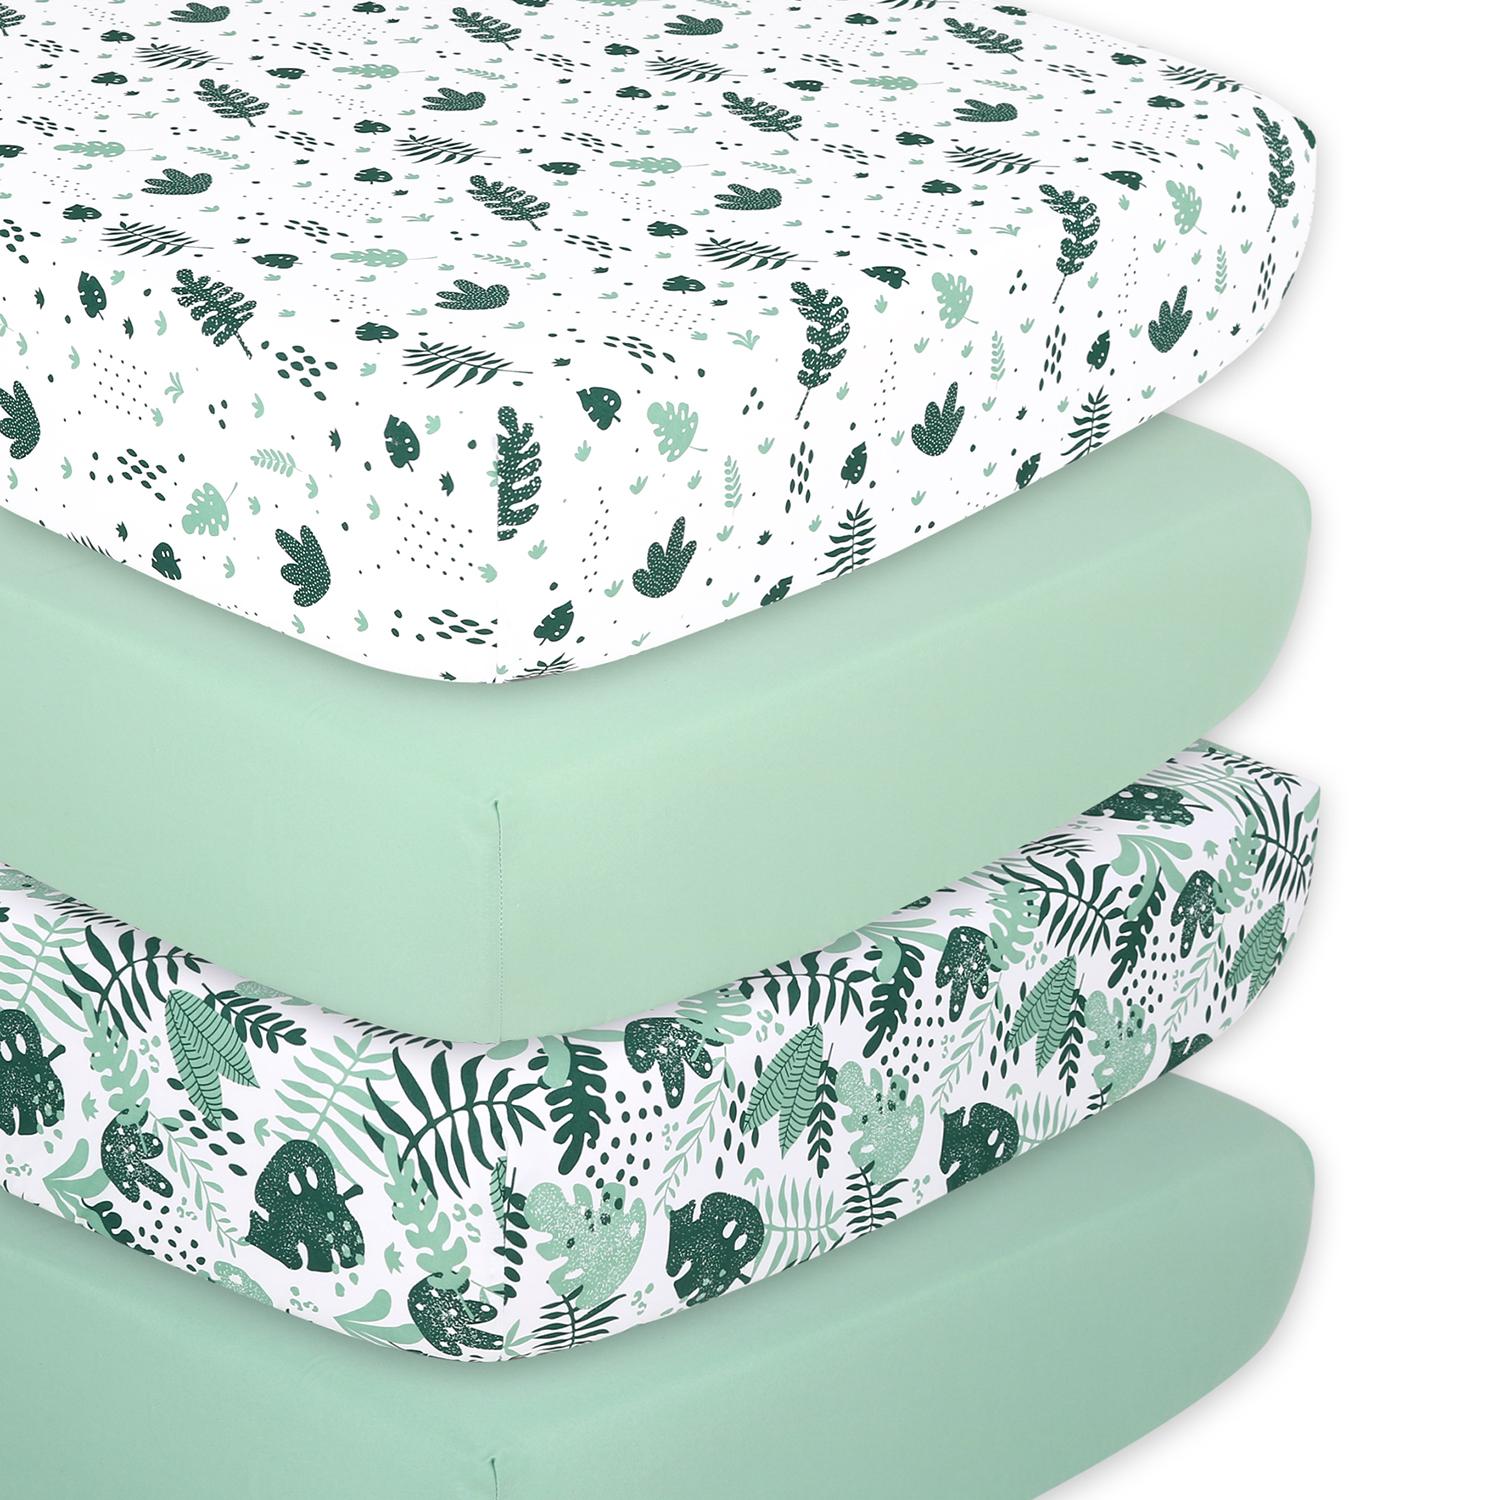 Botanical Leaf & Stripe The Peanutshell Fitted Crib Sheet Set for Baby Boys or Girls 2 Pack